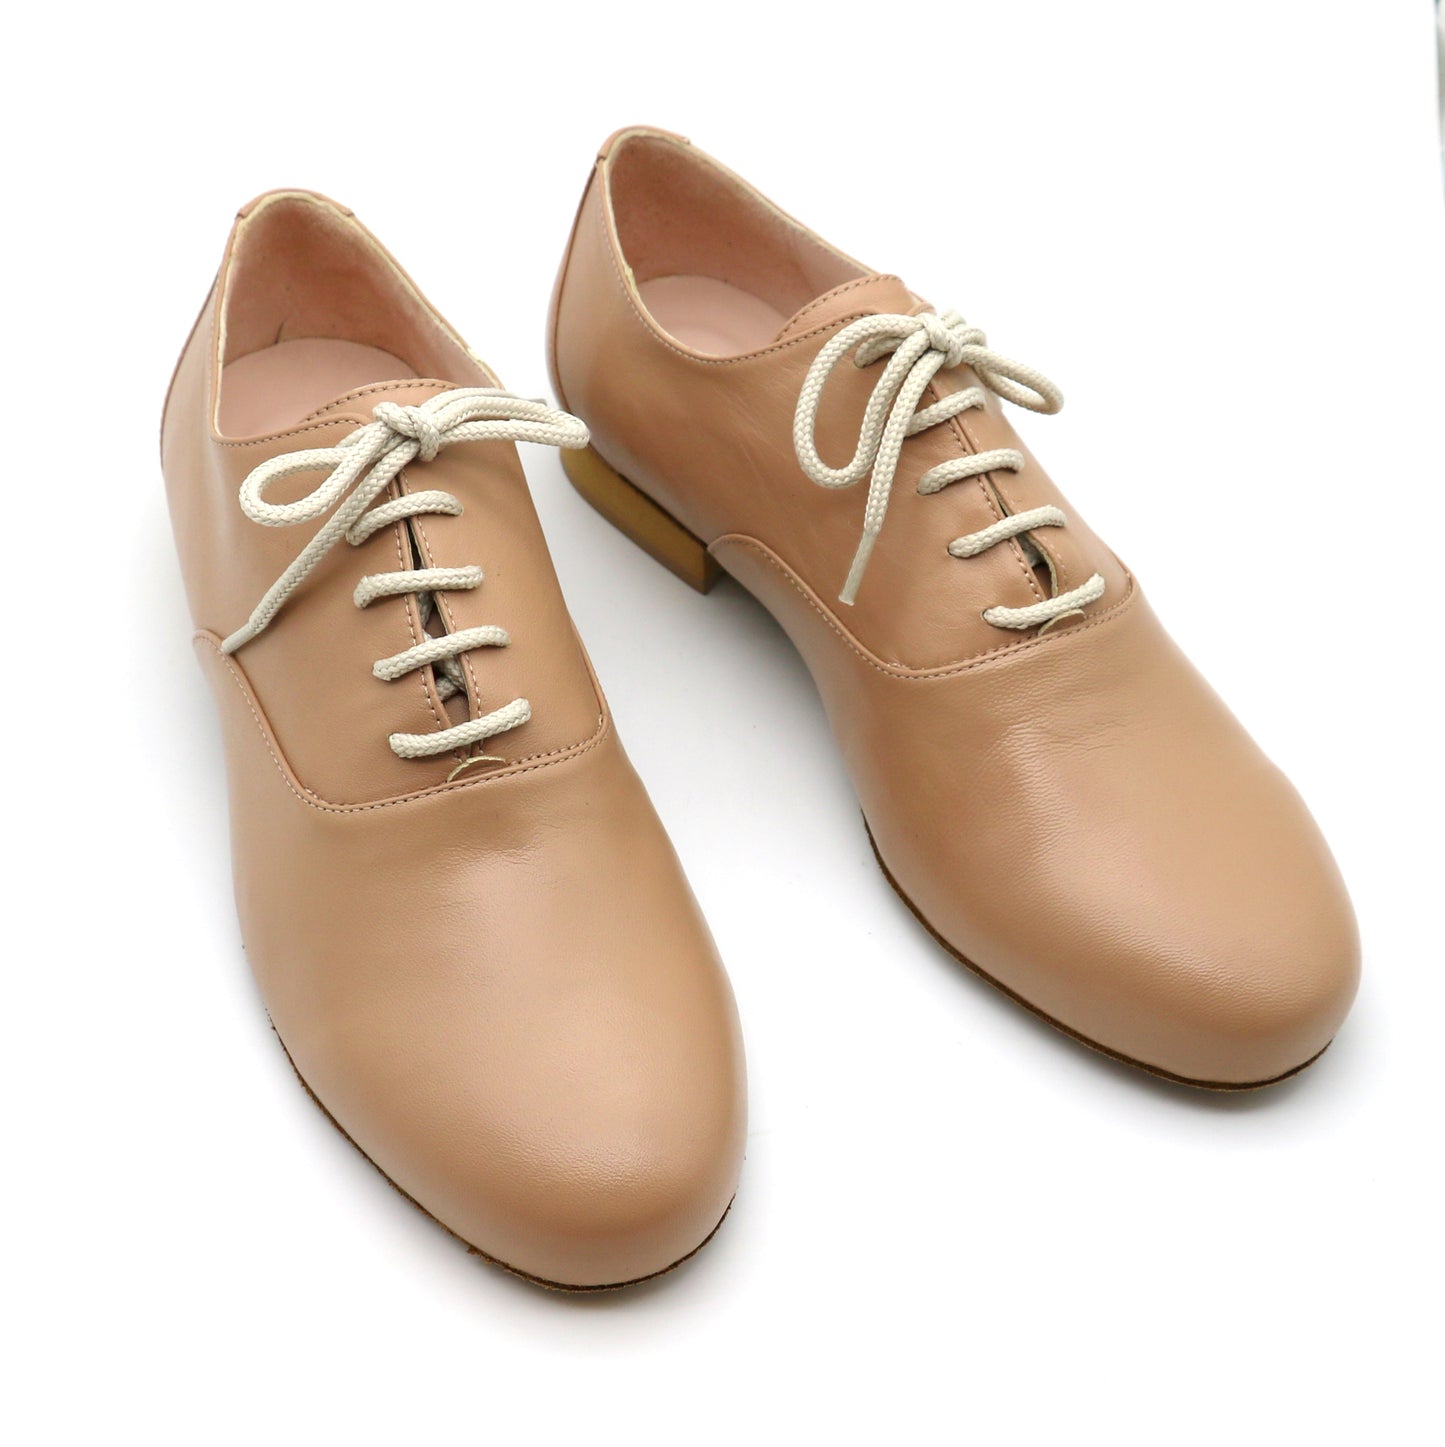 Tamango smooth leather cappuccino dance sole